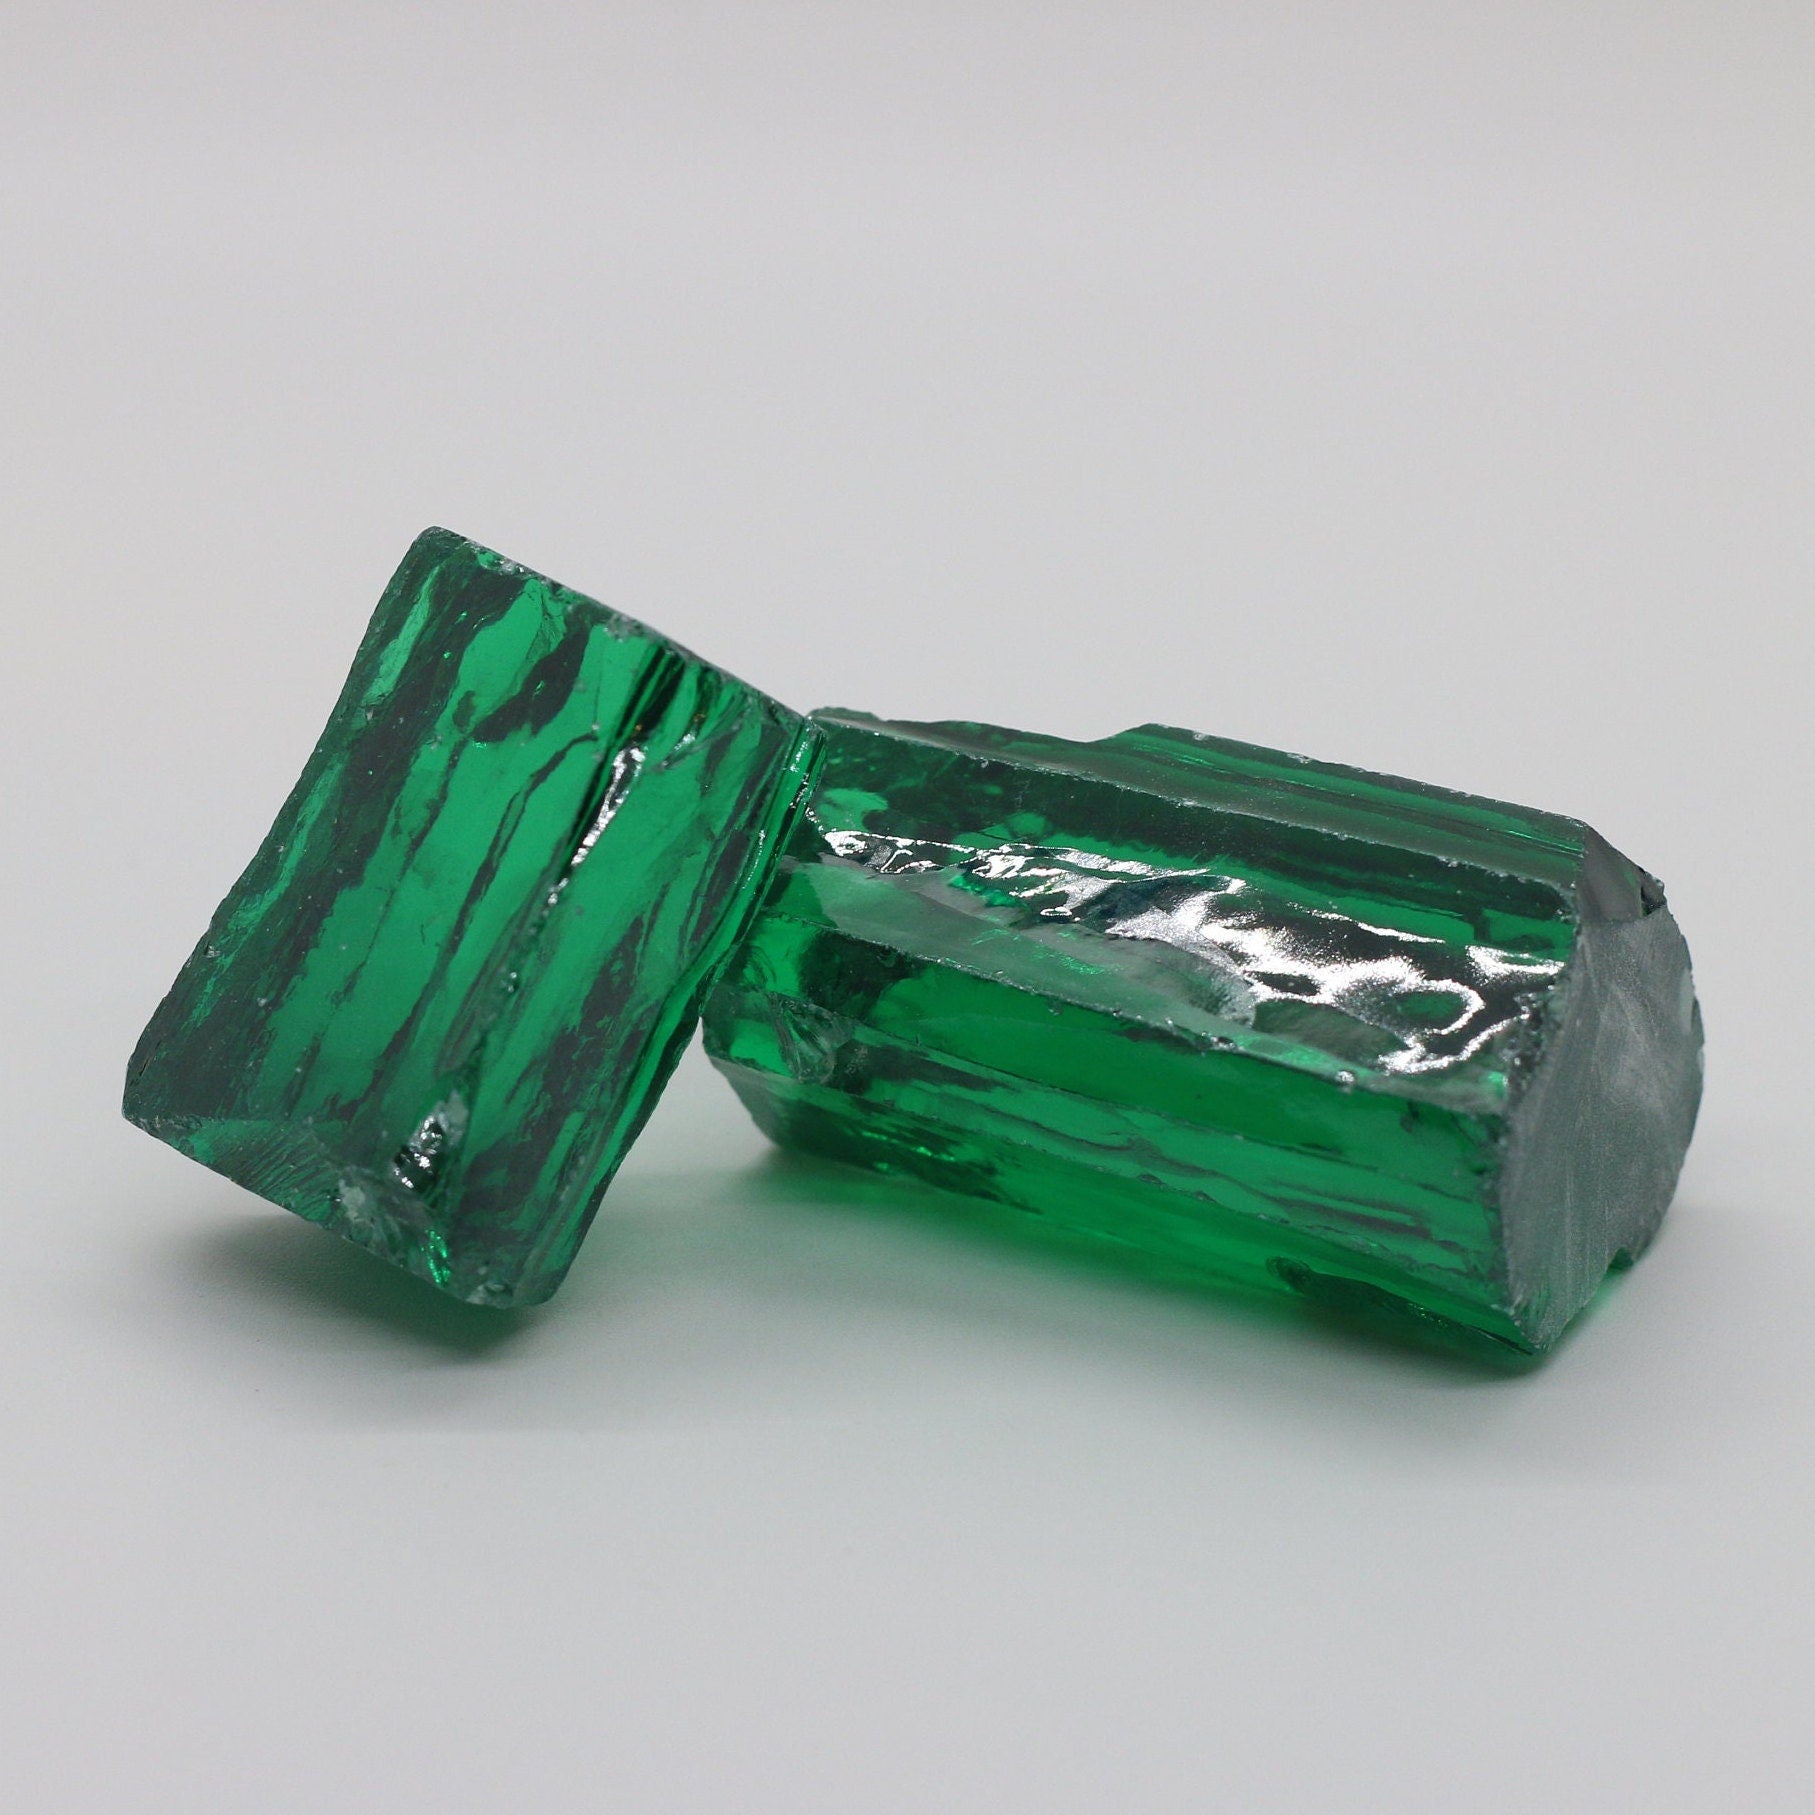 Emerald Cubic Zirconia Faceting Rough for Gem Cutting - Various Sizes